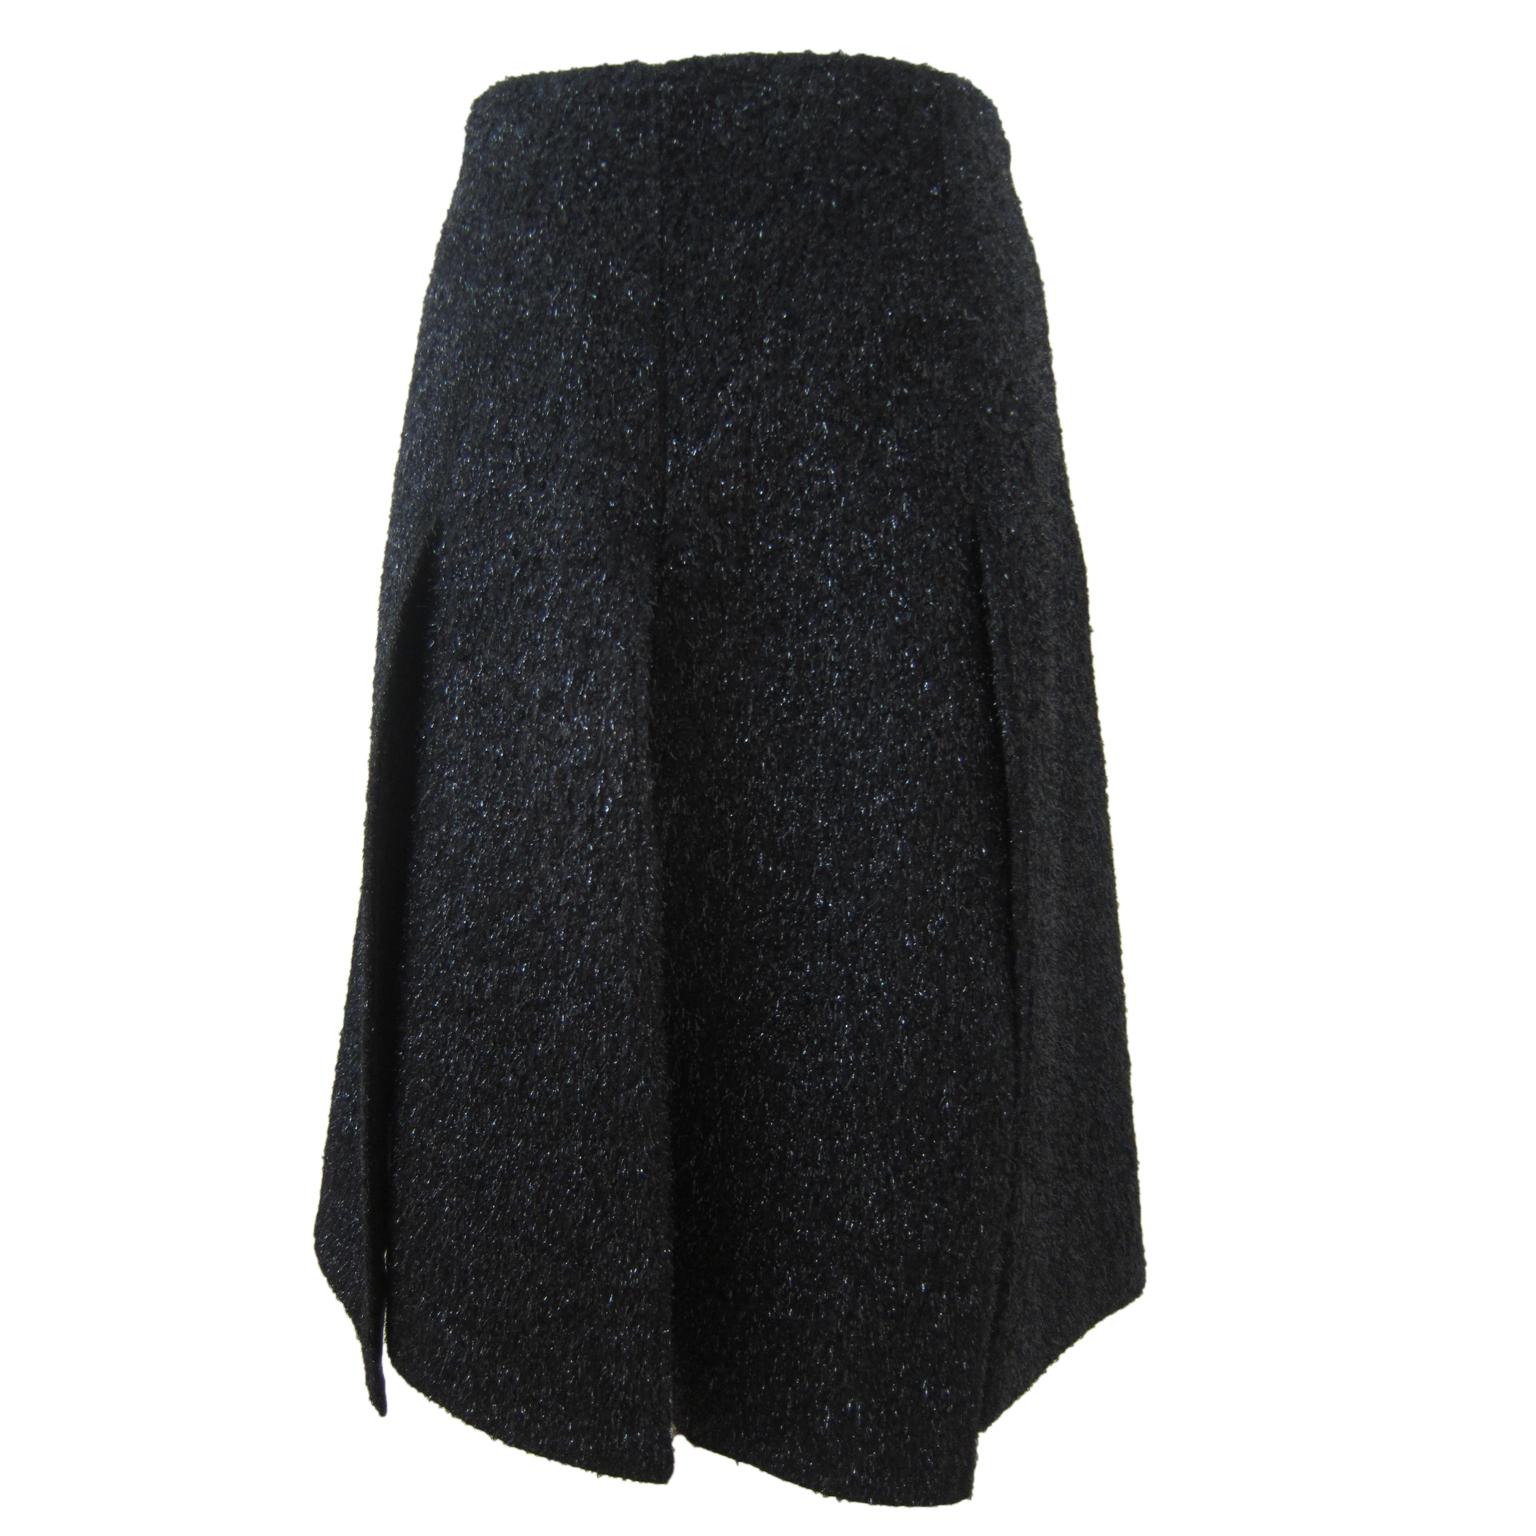 Prada skirt with slits in black metallic fuzzy like material. It consists of 6 panels that are split up very calculated pattern to be fit well on body. 
It has zipper closure.
Size : 40 (IT) 
Measurements :
Length : 53 cm
Waist : 70 cm